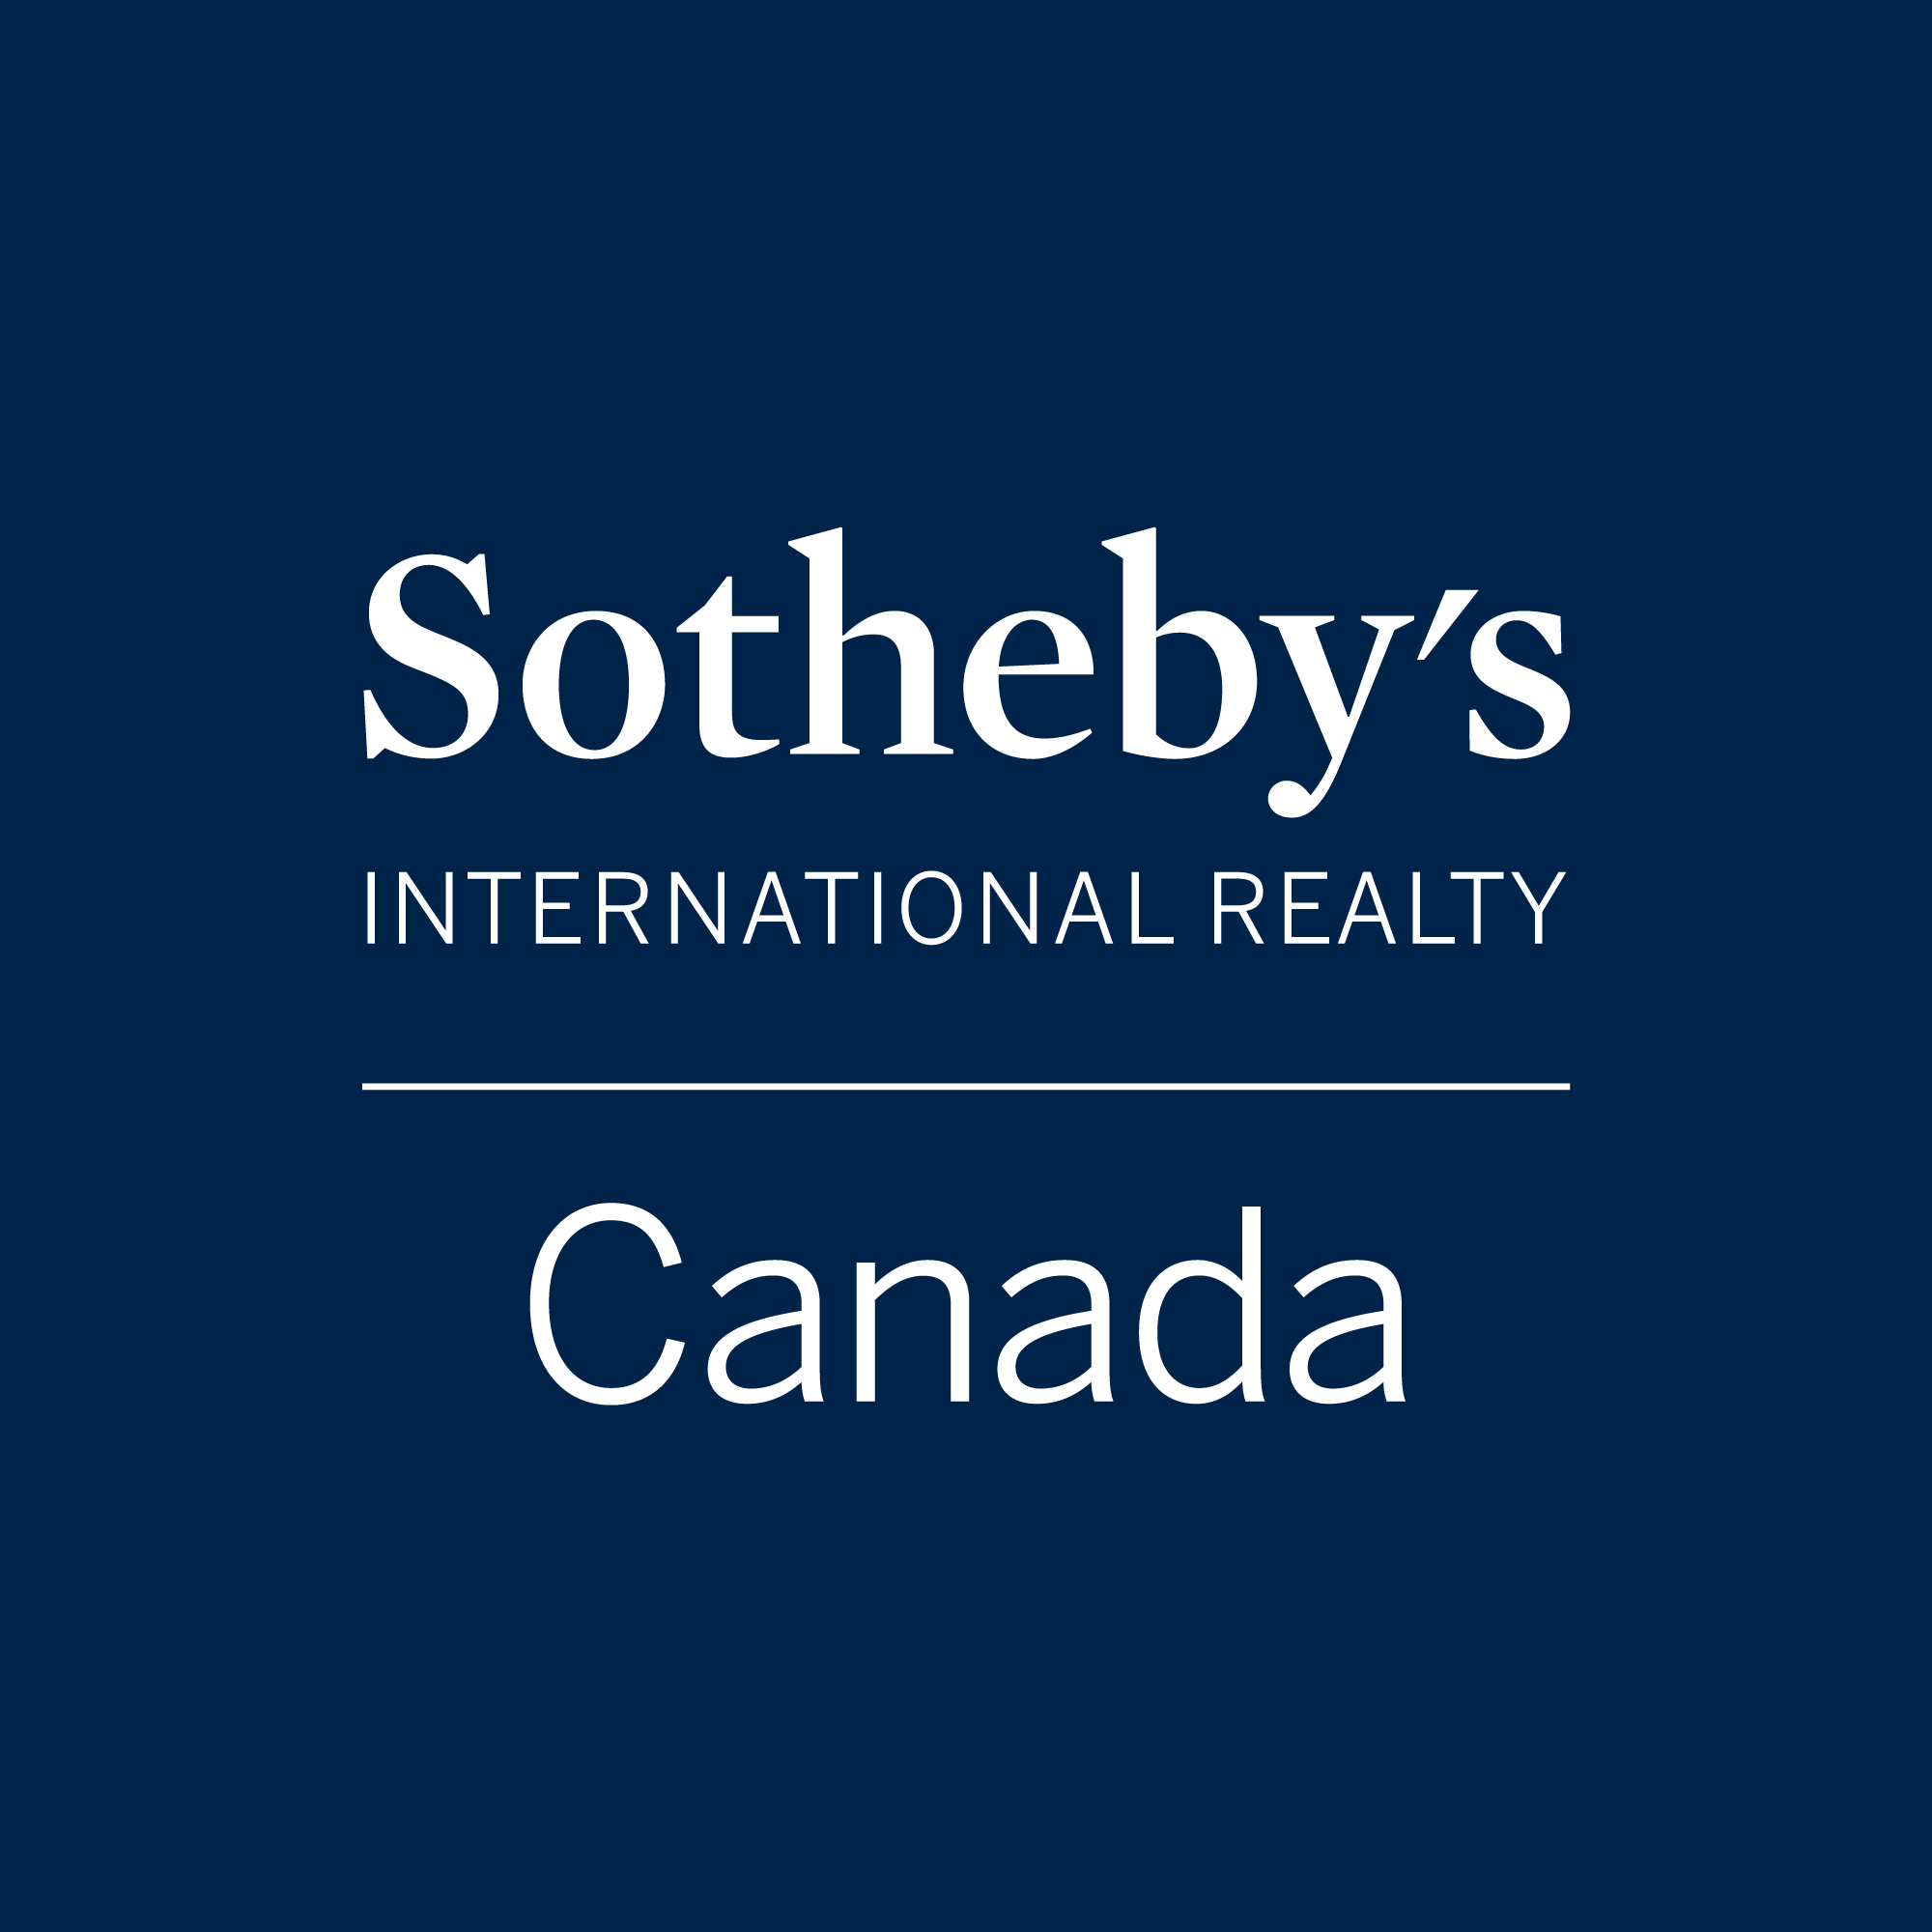 Sotheby's International Realty Canada - Investissement immobilier